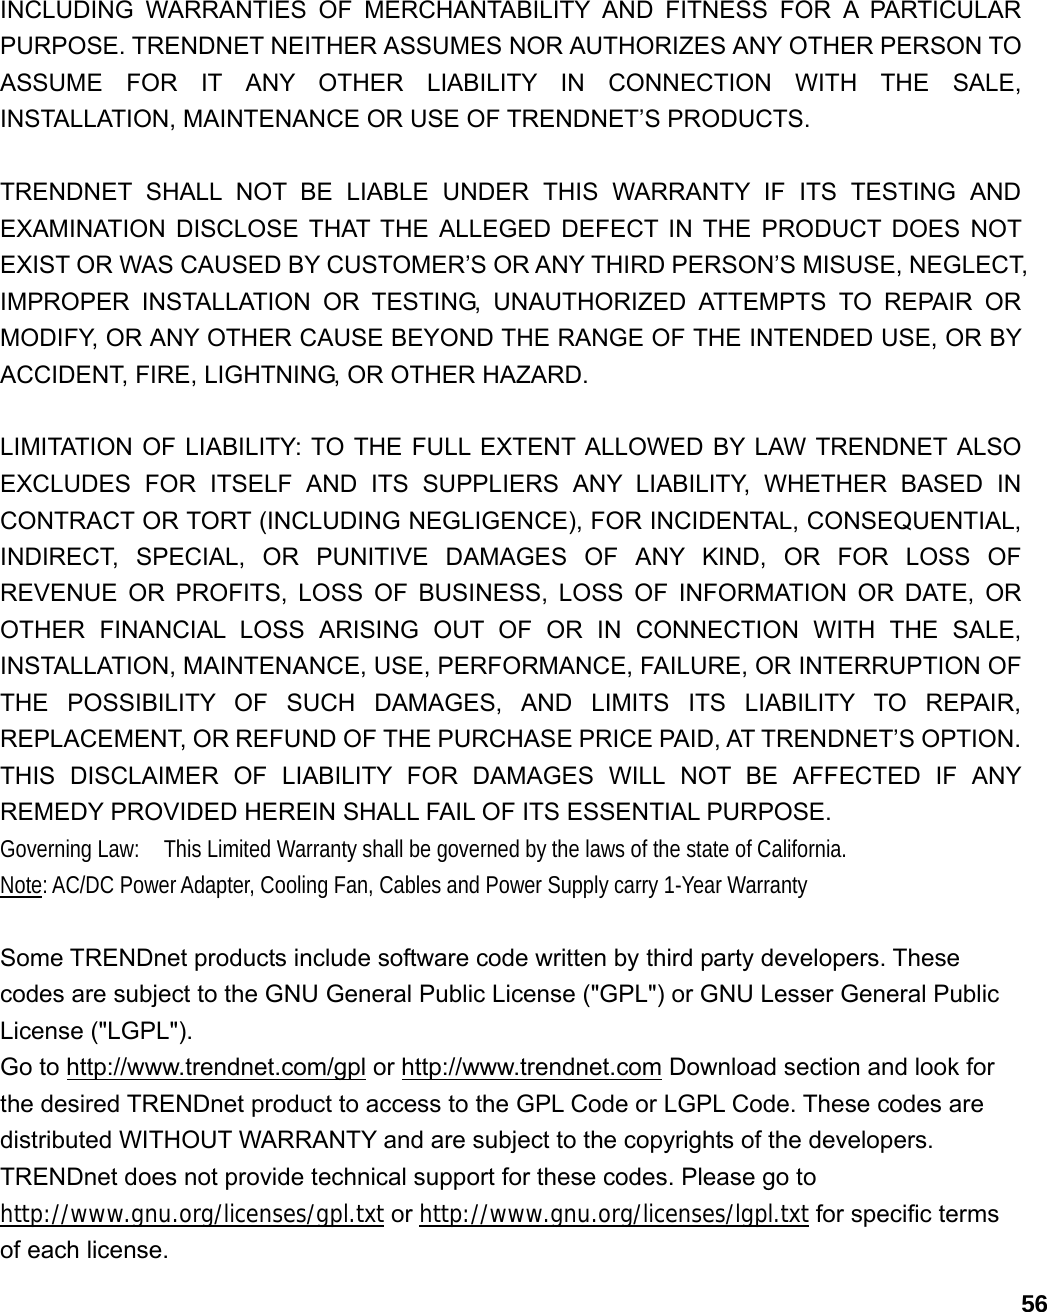                             56INCLUDING WARRANTIES OF MERCHANTABILITY AND FITNESS FOR A PARTICULAR PURPOSE. TRENDNET NEITHER ASSUMES NOR AUTHORIZES ANY OTHER PERSON TO ASSUME FOR IT ANY OTHER LIABILITY IN CONNECTION WITH THE SALE, INSTALLATION, MAINTENANCE OR USE OF TRENDNET’S PRODUCTS.  TRENDNET SHALL NOT BE LIABLE UNDER THIS WARRANTY IF ITS TESTING AND EXAMINATION DISCLOSE THAT THE ALLEGED DEFECT IN THE PRODUCT DOES NOT EXIST OR WAS CAUSED BY CUSTOMER’S OR ANY THIRD PERSON’S MISUSE, NEGLECT, IMPROPER INSTALLATION OR TESTING, UNAUTHORIZED ATTEMPTS TO REPAIR OR MODIFY, OR ANY OTHER CAUSE BEYOND THE RANGE OF THE INTENDED USE, OR BY ACCIDENT, FIRE, LIGHTNING, OR OTHER HAZARD.  LIMITATION OF LIABILITY: TO THE FULL EXTENT ALLOWED BY LAW TRENDNET ALSO EXCLUDES FOR ITSELF AND ITS SUPPLIERS ANY LIABILITY, WHETHER BASED IN CONTRACT OR TORT (INCLUDING NEGLIGENCE), FOR INCIDENTAL, CONSEQUENTIAL, INDIRECT, SPECIAL, OR PUNITIVE DAMAGES OF ANY KIND, OR FOR LOSS OF REVENUE OR PROFITS, LOSS OF BUSINESS, LOSS OF INFORMATION OR DATE, OR OTHER FINANCIAL LOSS ARISING OUT OF OR IN CONNECTION WITH THE SALE, INSTALLATION, MAINTENANCE, USE, PERFORMANCE, FAILURE, OR INTERRUPTION OF THE POSSIBILITY OF SUCH DAMAGES, AND LIMITS ITS LIABILITY TO REPAIR, REPLACEMENT, OR REFUND OF THE PURCHASE PRICE PAID, AT TRENDNET’S OPTION. THIS DISCLAIMER OF LIABILITY FOR DAMAGES WILL NOT BE AFFECTED IF ANY REMEDY PROVIDED HEREIN SHALL FAIL OF ITS ESSENTIAL PURPOSE. Governing Law:    This Limited Warranty shall be governed by the laws of the state of California. Note: AC/DC Power Adapter, Cooling Fan, Cables and Power Supply carry 1-Year Warranty  Some TRENDnet products include software code written by third party developers. These codes are subject to the GNU General Public License (&quot;GPL&quot;) or GNU Lesser General Public License (&quot;LGPL&quot;).   Go to http://www.trendnet.com/gpl or http://www.trendnet.com Download section and look for the desired TRENDnet product to access to the GPL Code or LGPL Code. These codes are distributed WITHOUT WARRANTY and are subject to the copyrights of the developers. TRENDnet does not provide technical support for these codes. Please go to http://www.gnu.org/licenses/gpl.txt or http://www.gnu.org/licenses/lgpl.txt for specific terms of each license. 